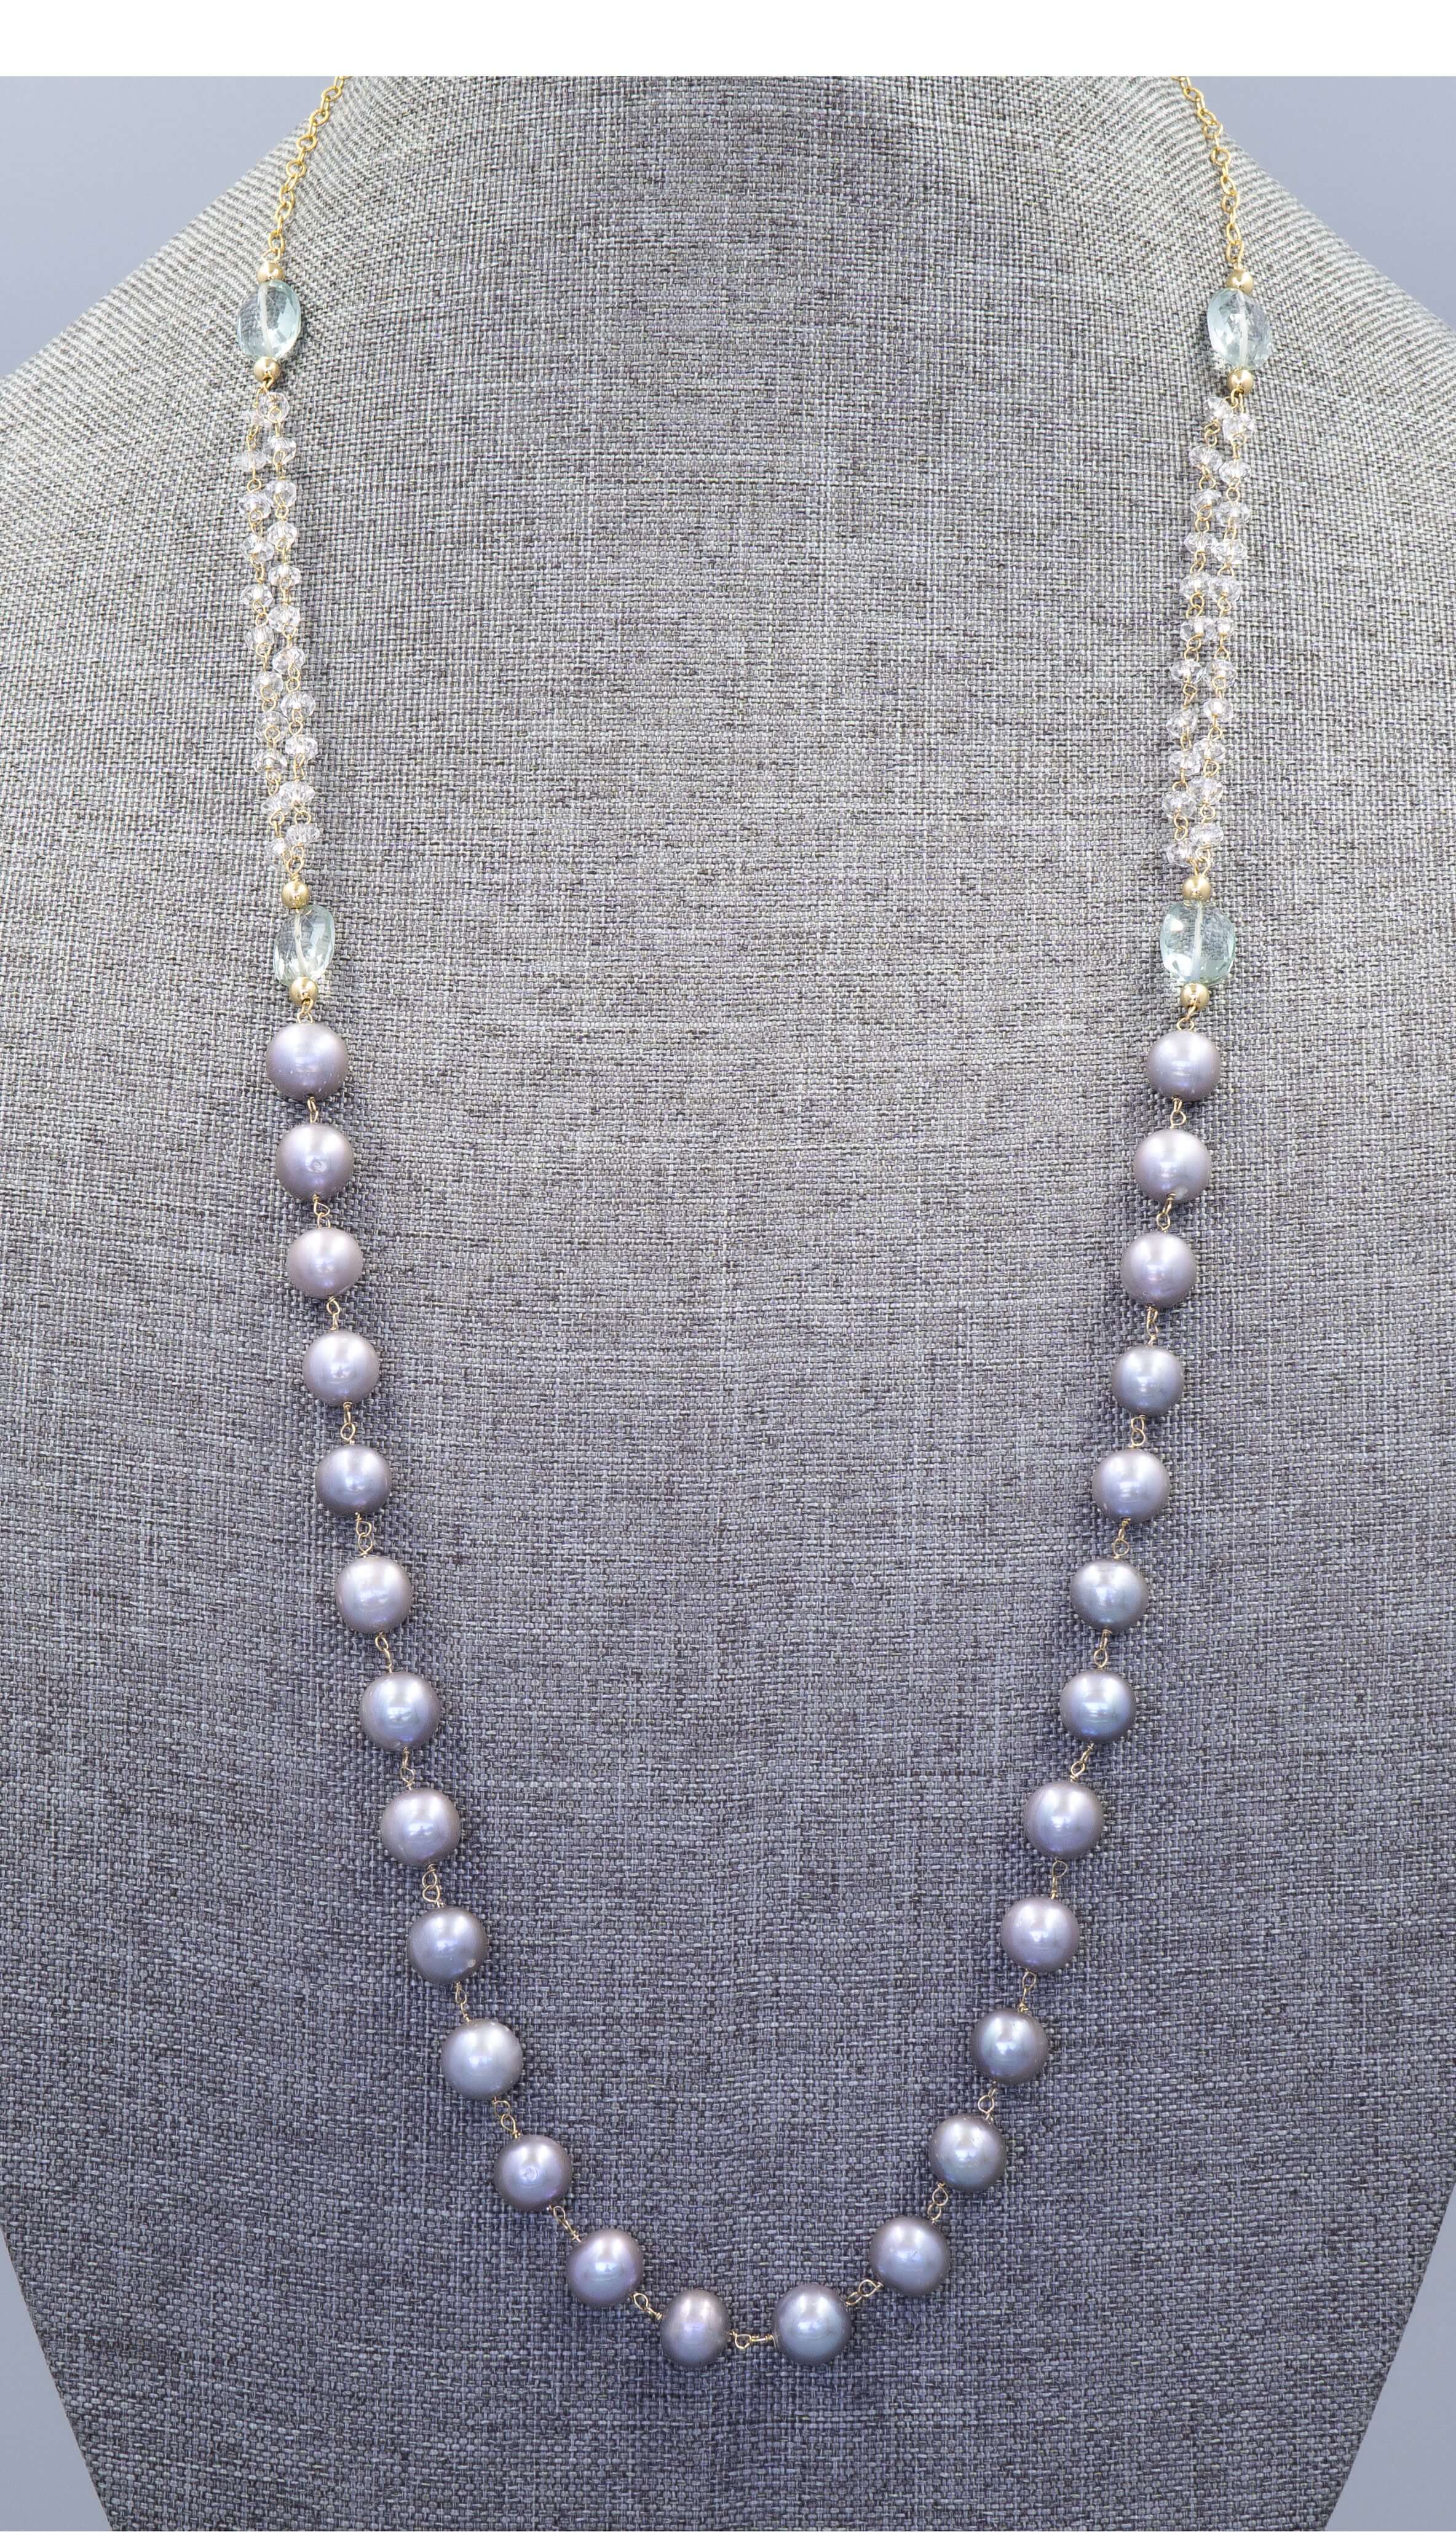 Necklace on display